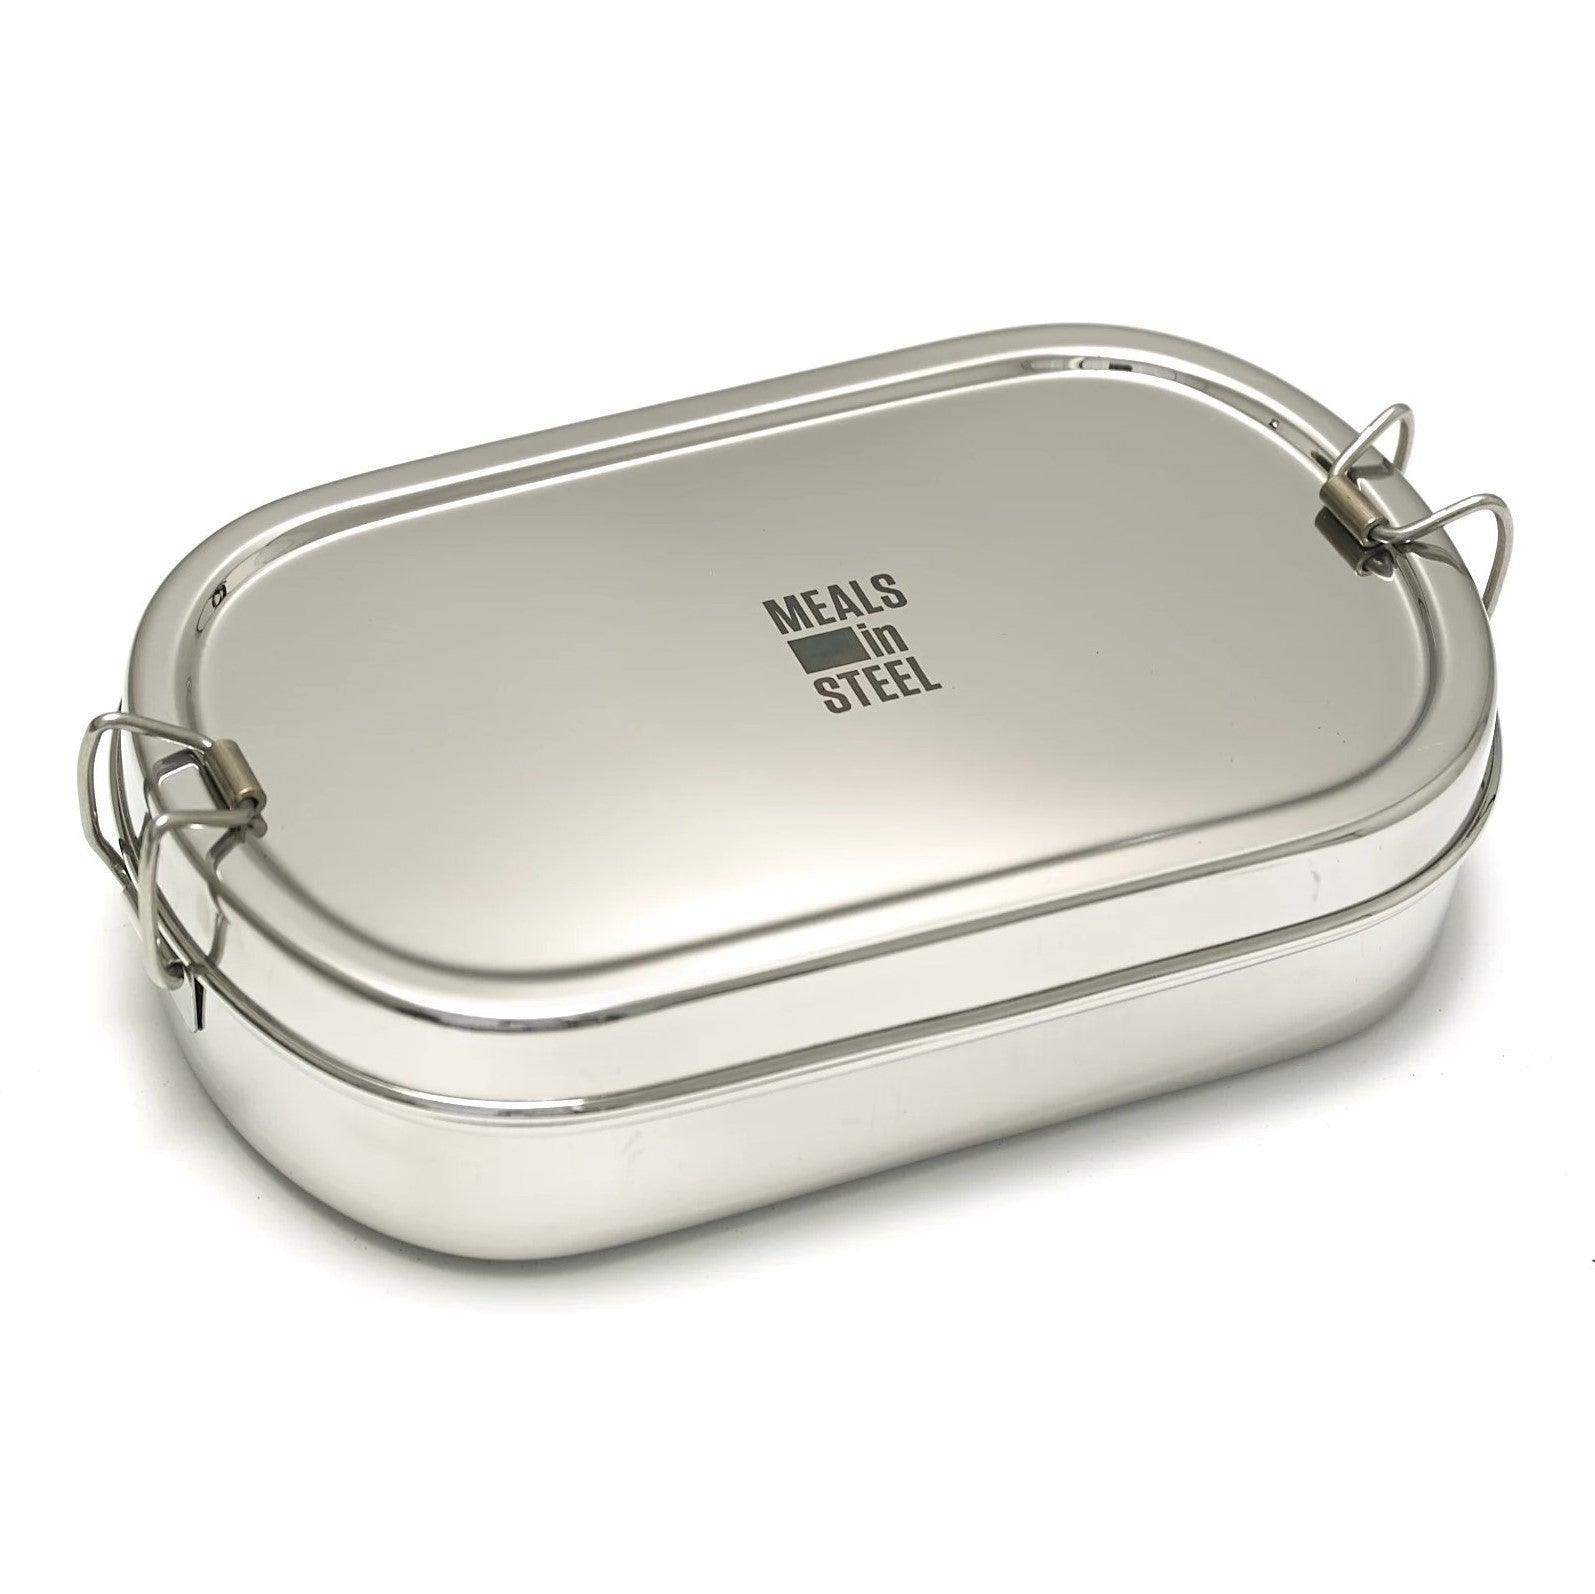 medium-oval-shape-lunch-box-or-stainless-steel-meals-in-steel-4